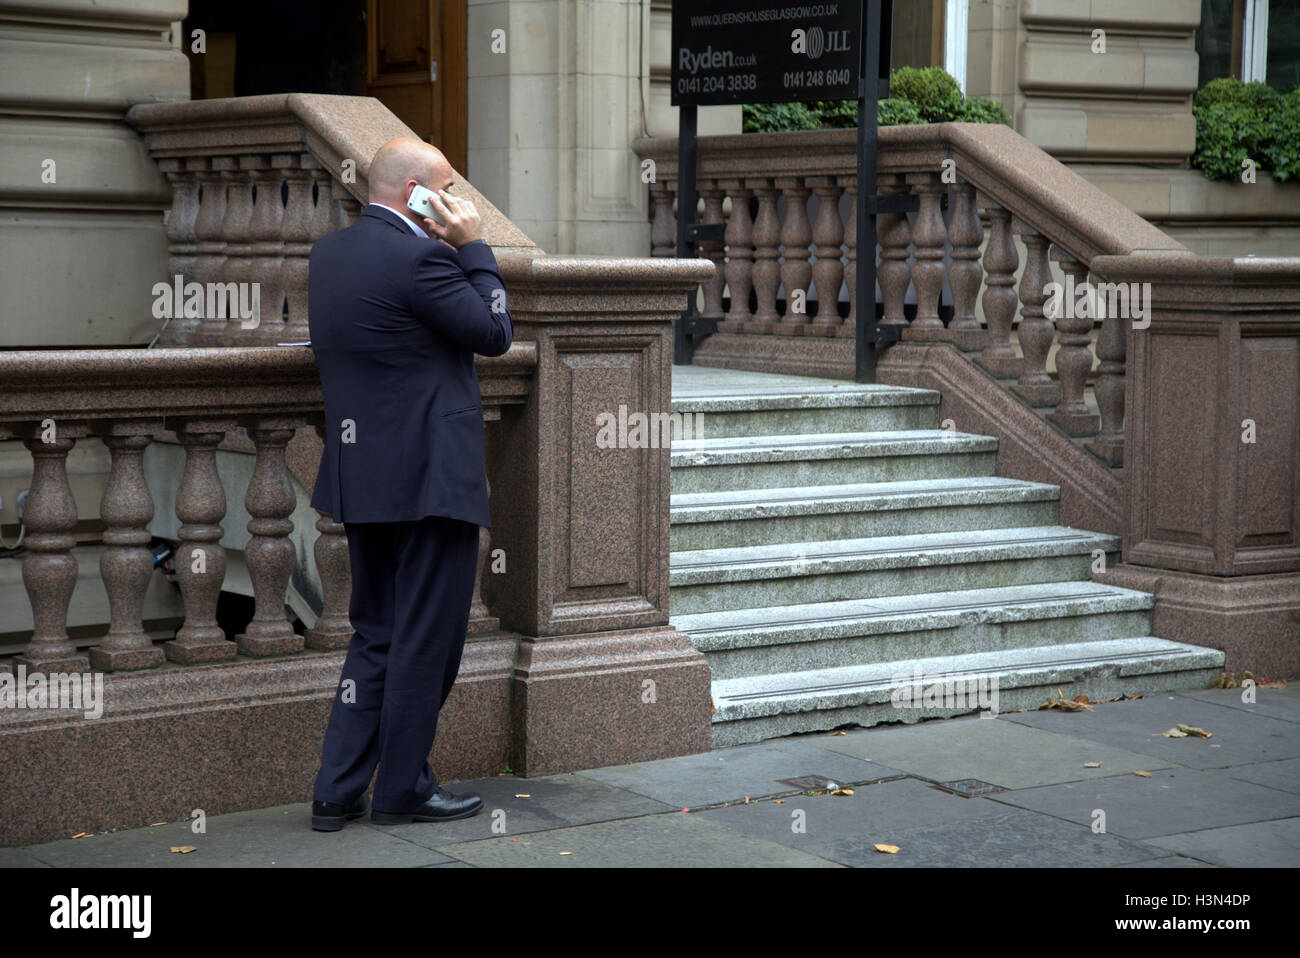 Glasgow street scenes businessman using mobile phone outside Victorian building steps Stock Photo